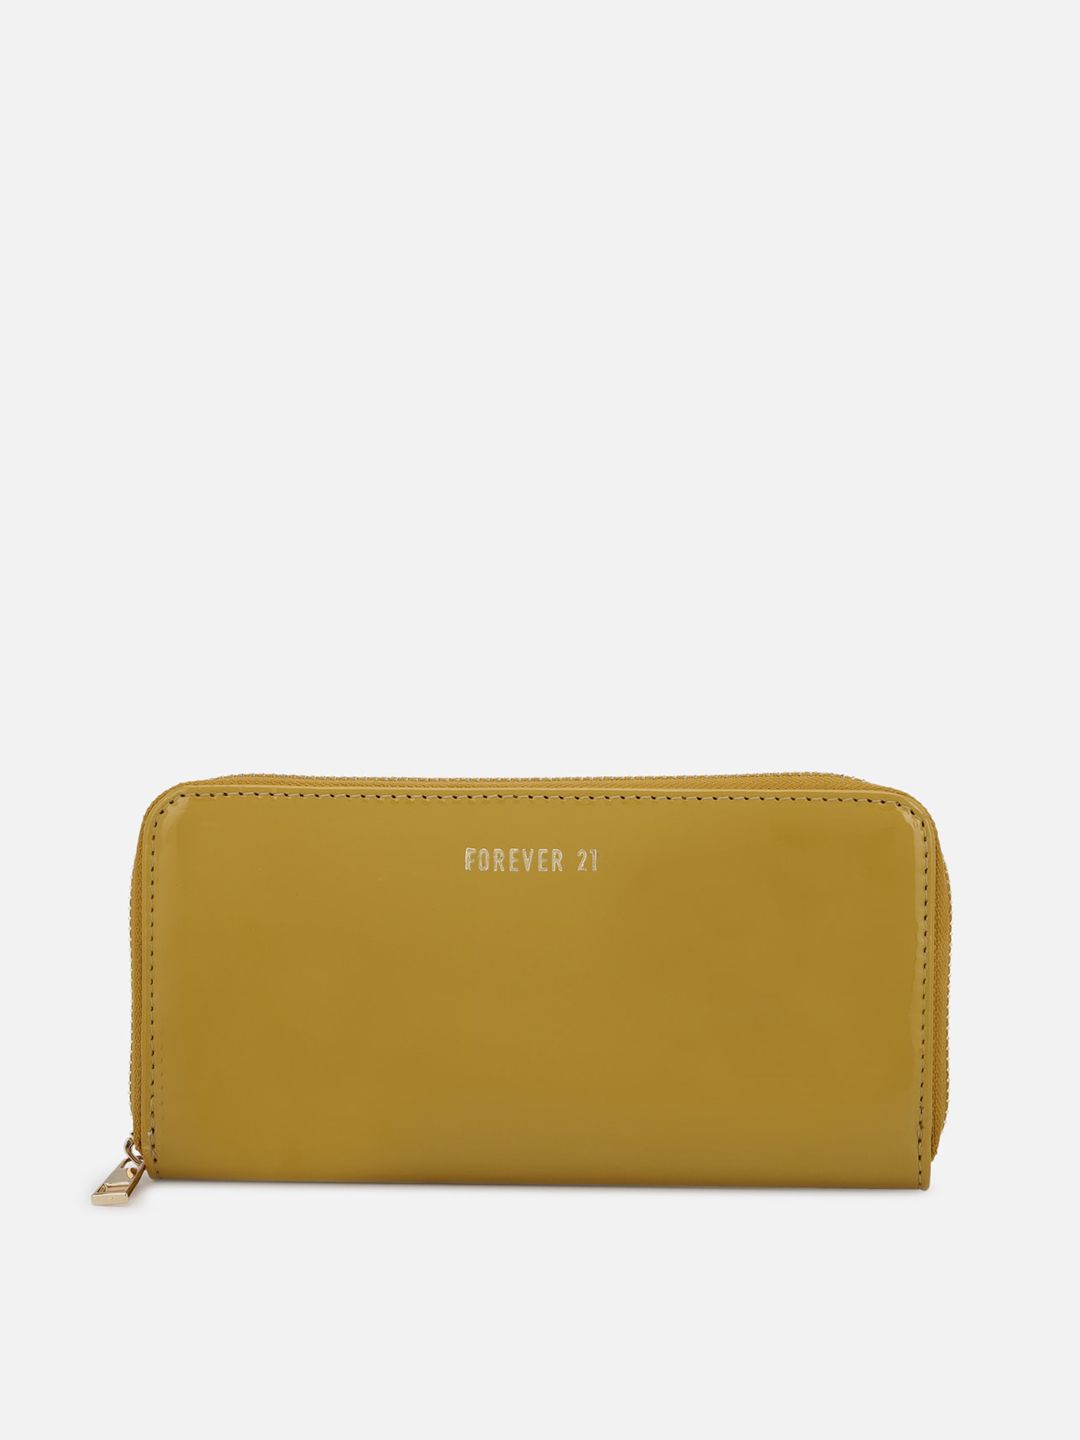 FOREVER 21 Green PU Structured Sling Bag Price in India